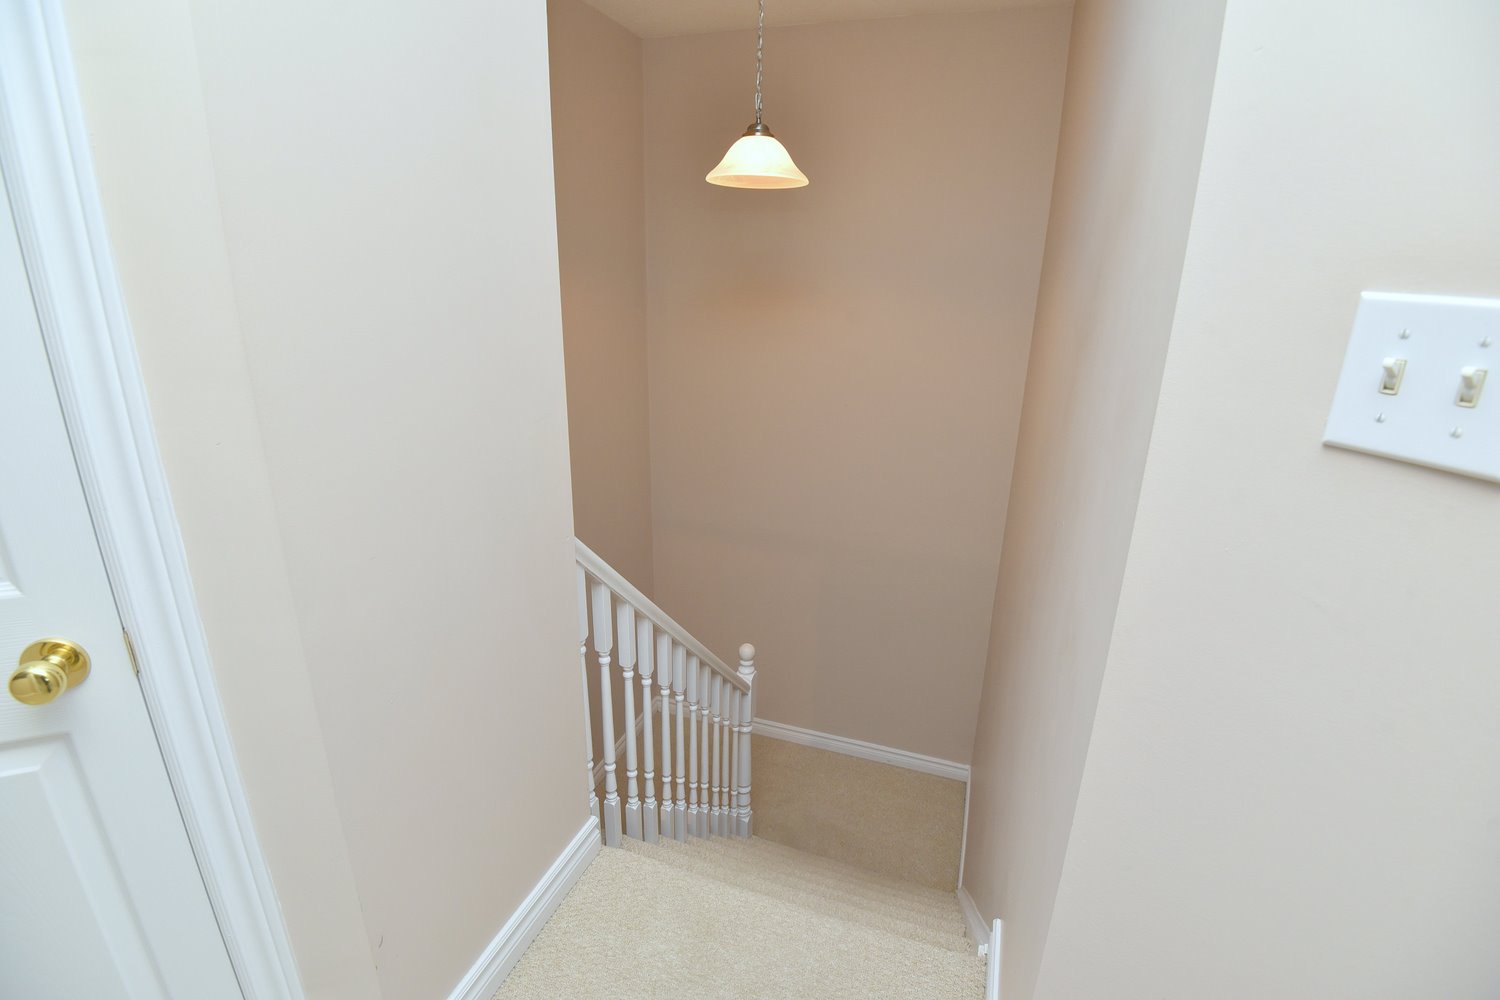 Staircase Overview